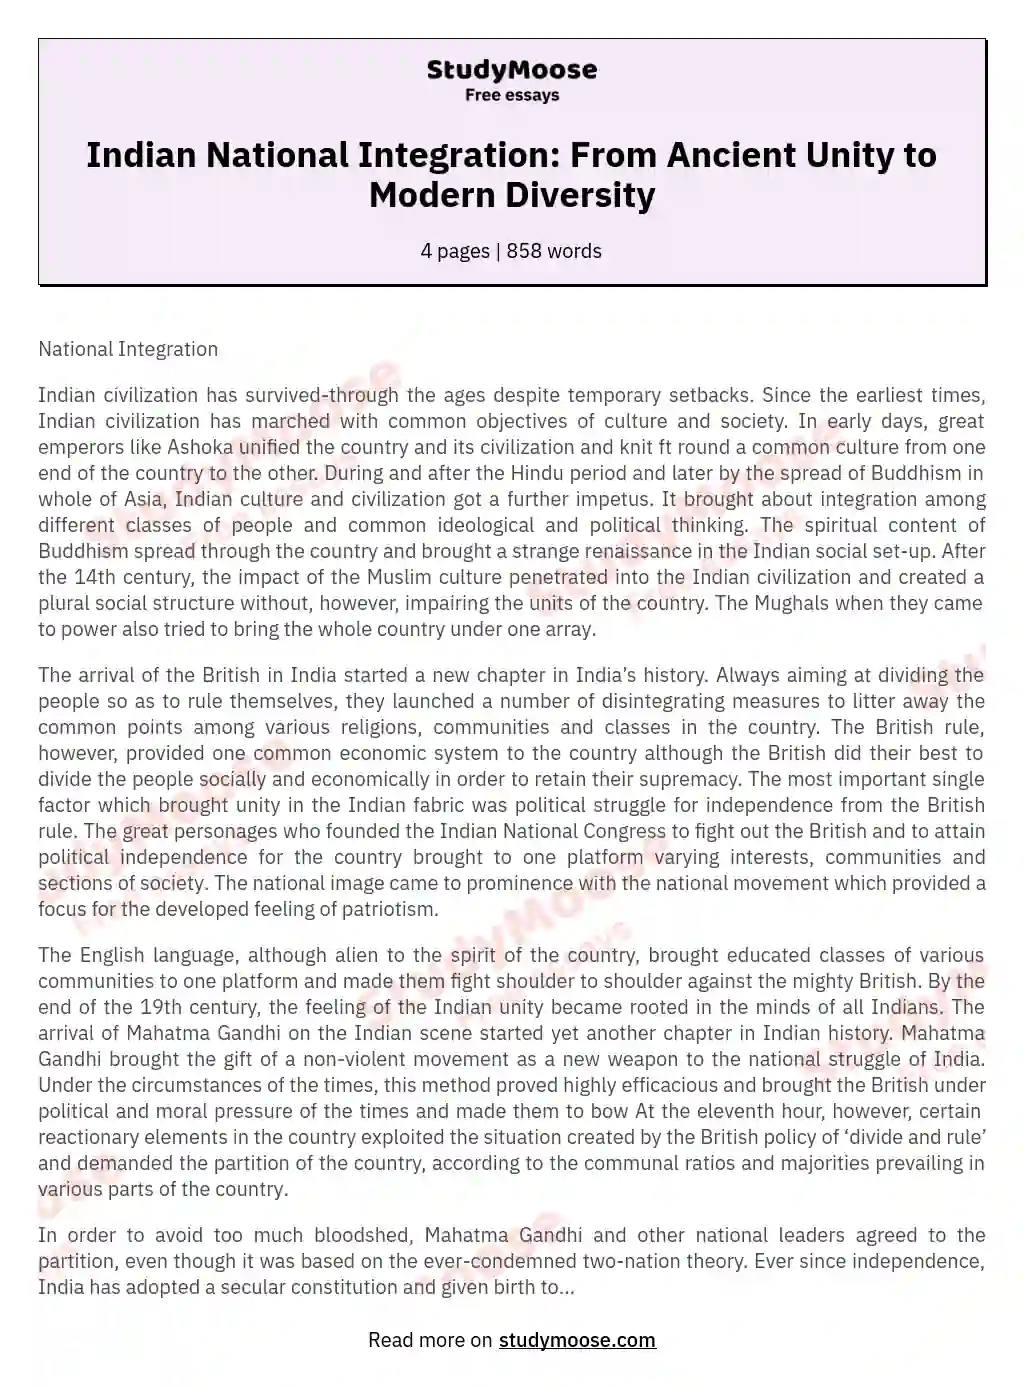 Indian National Integration: From Ancient Unity to Modern Diversity essay